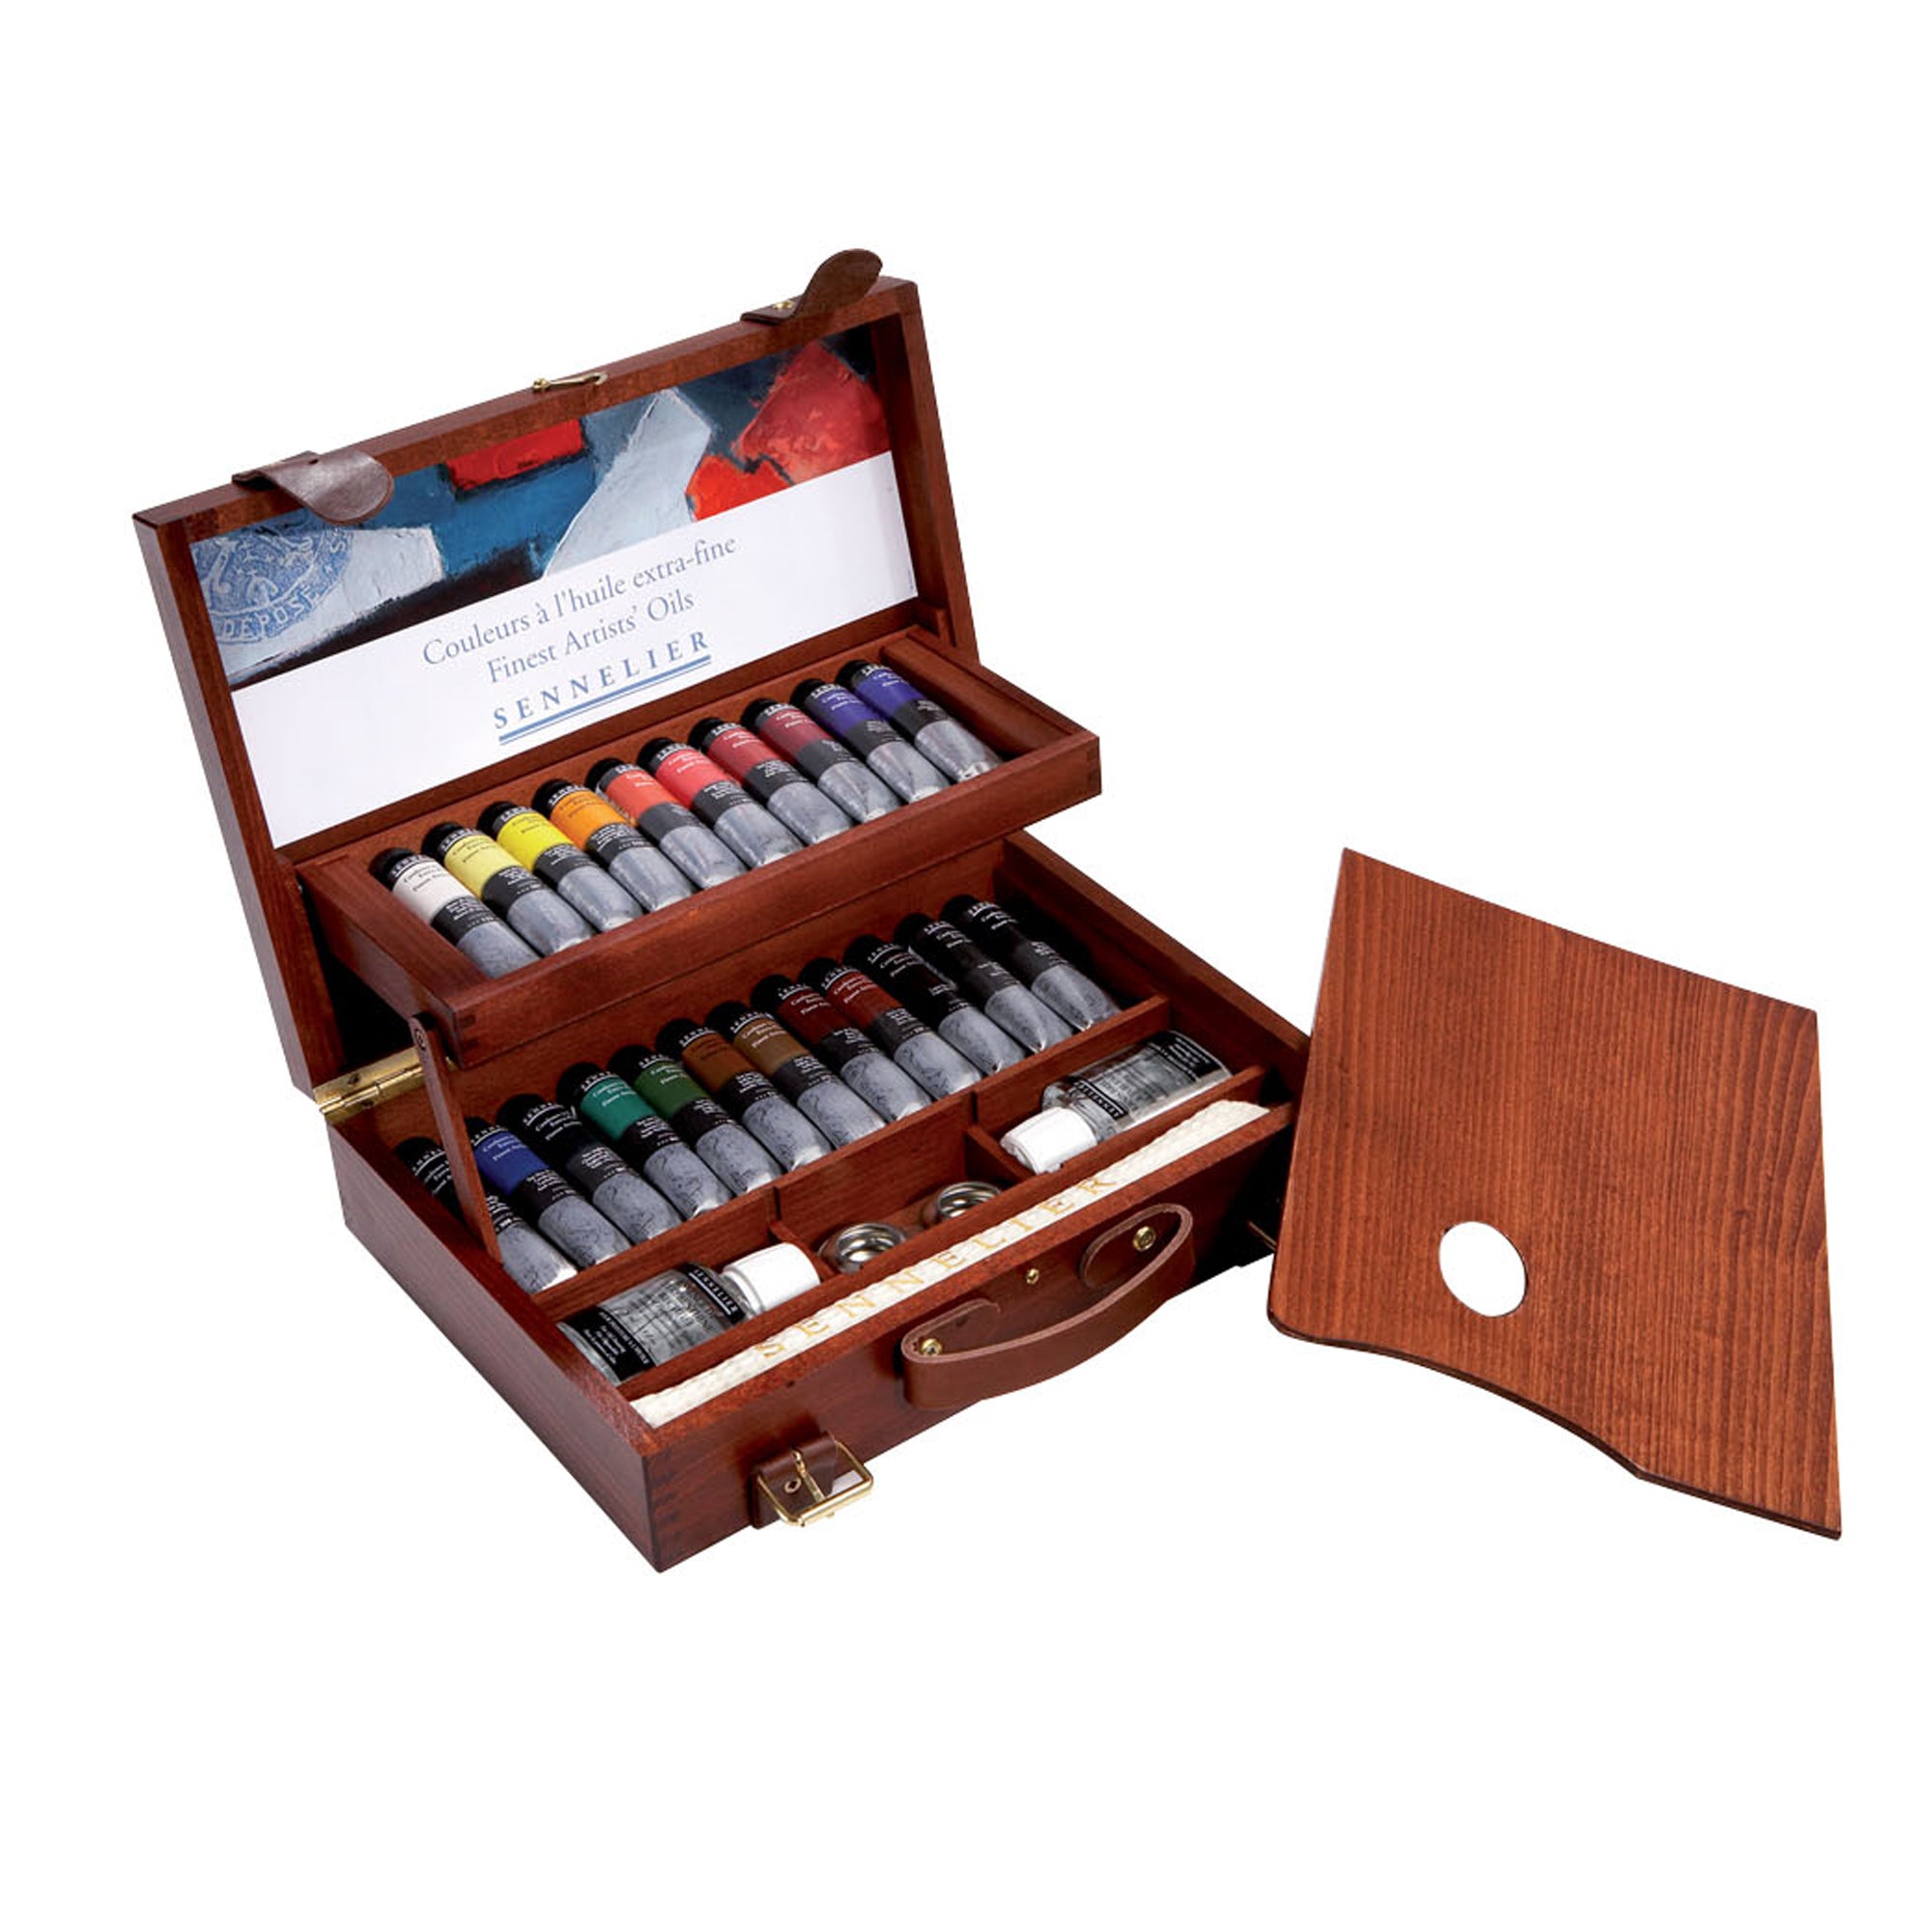 Sennelier Wooden Artists Oil Set of 22 Tubes- Includes Complimentary Artists Apron